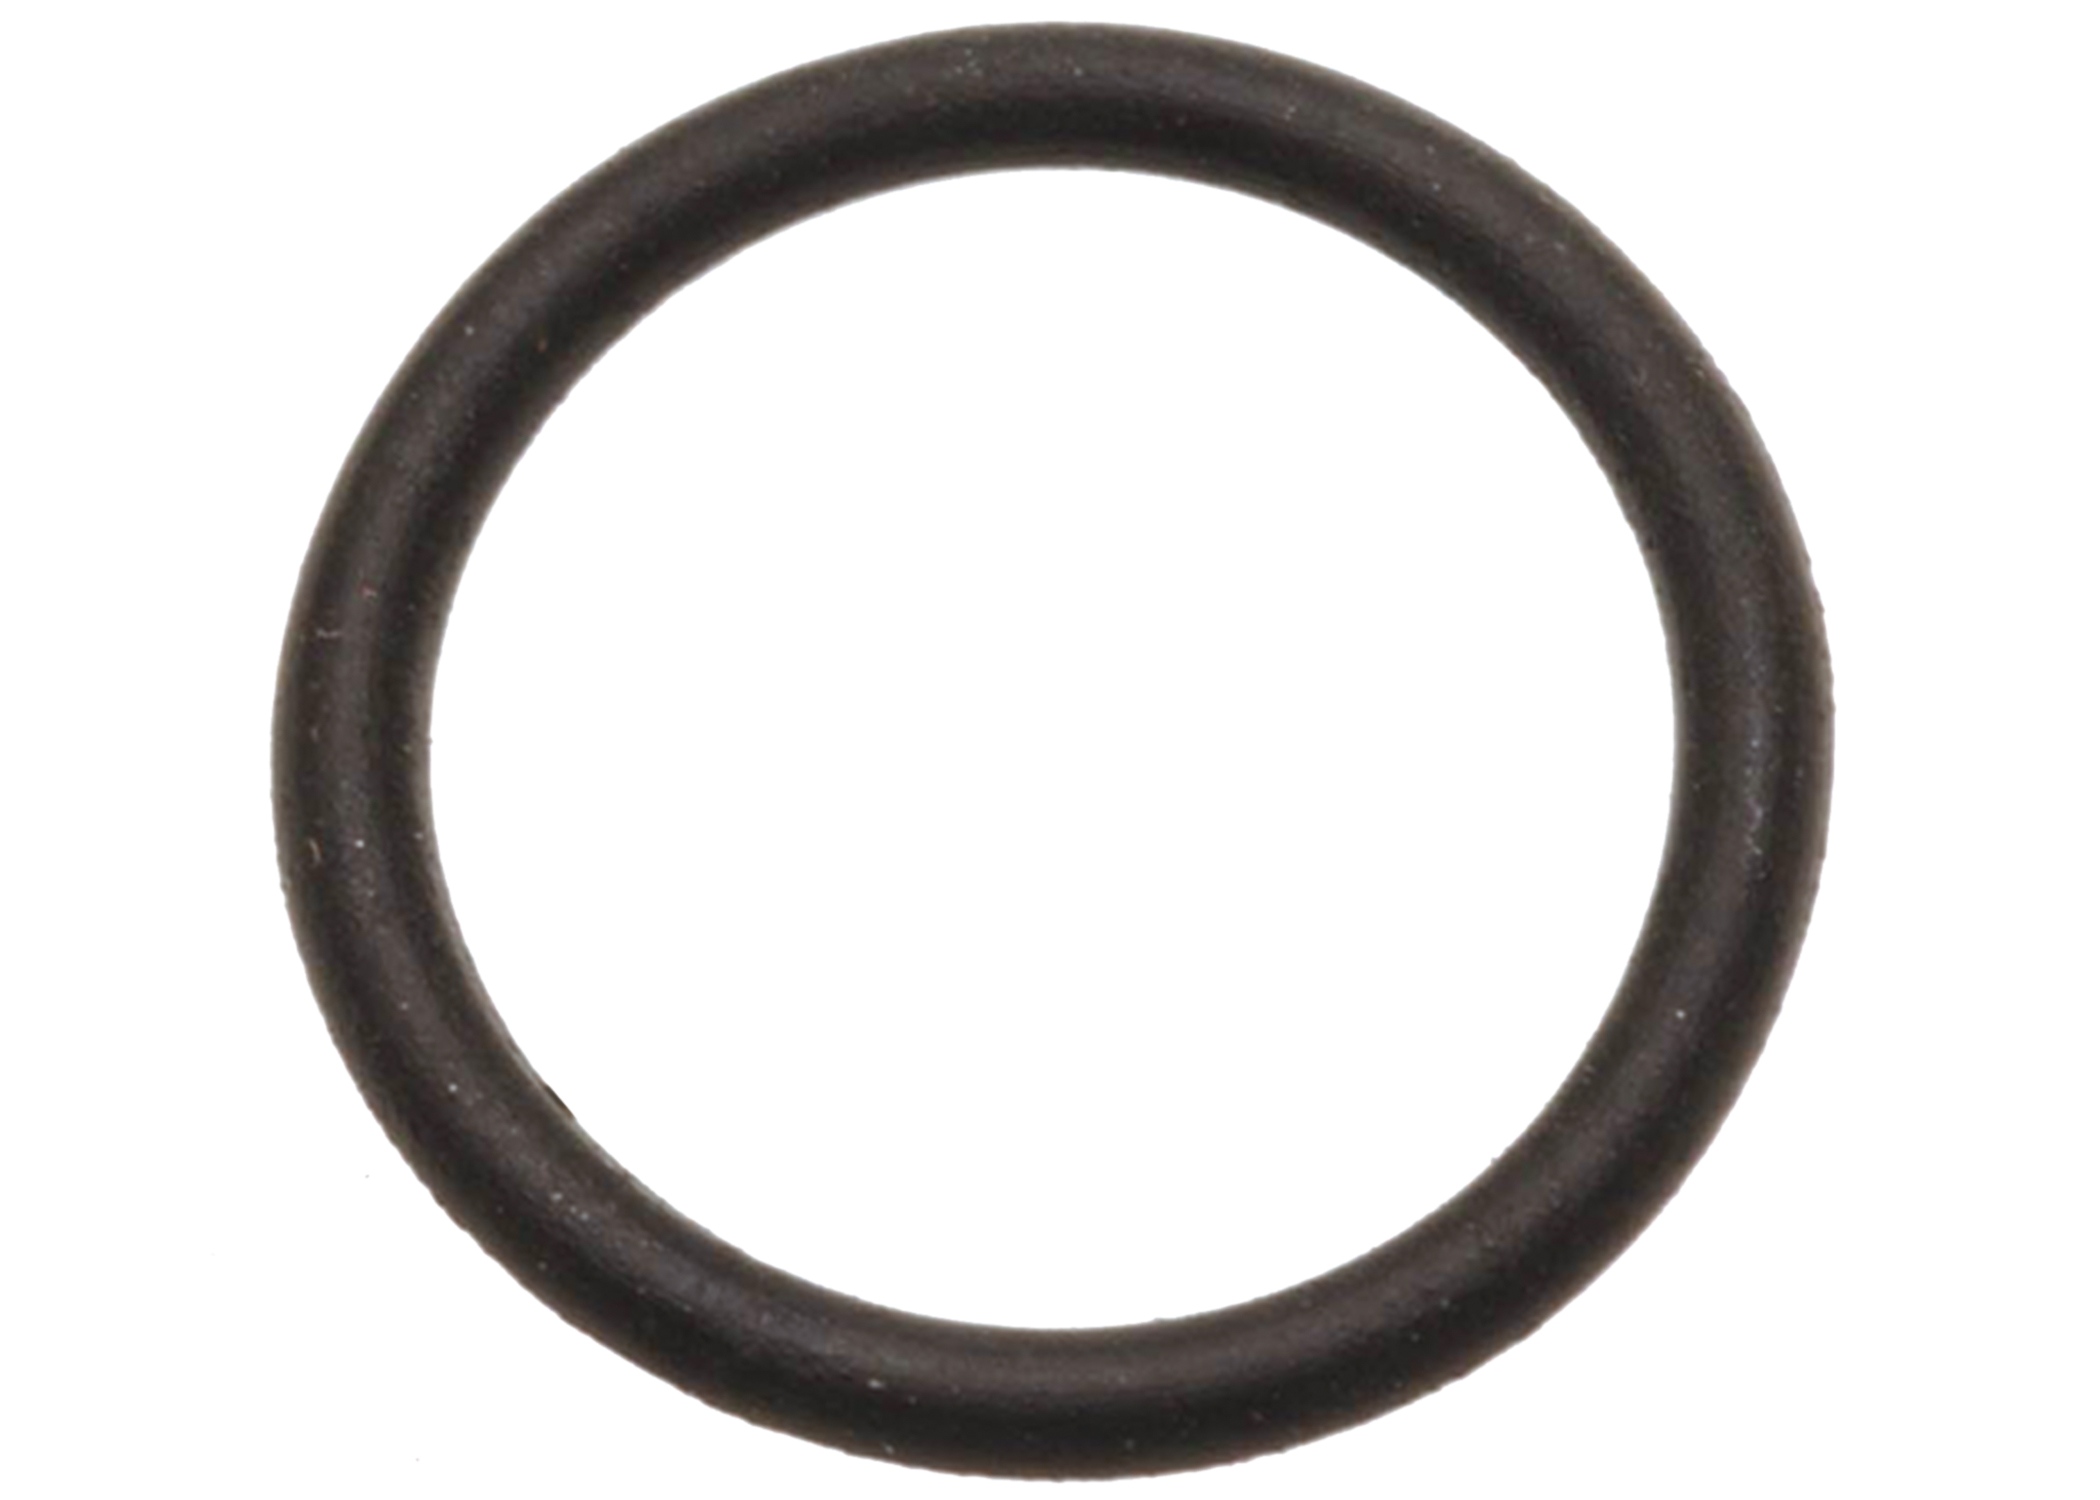 GM GENUINE PARTS - Automatic Transmission Ball Valve Bushing Seal - GMP 8642581